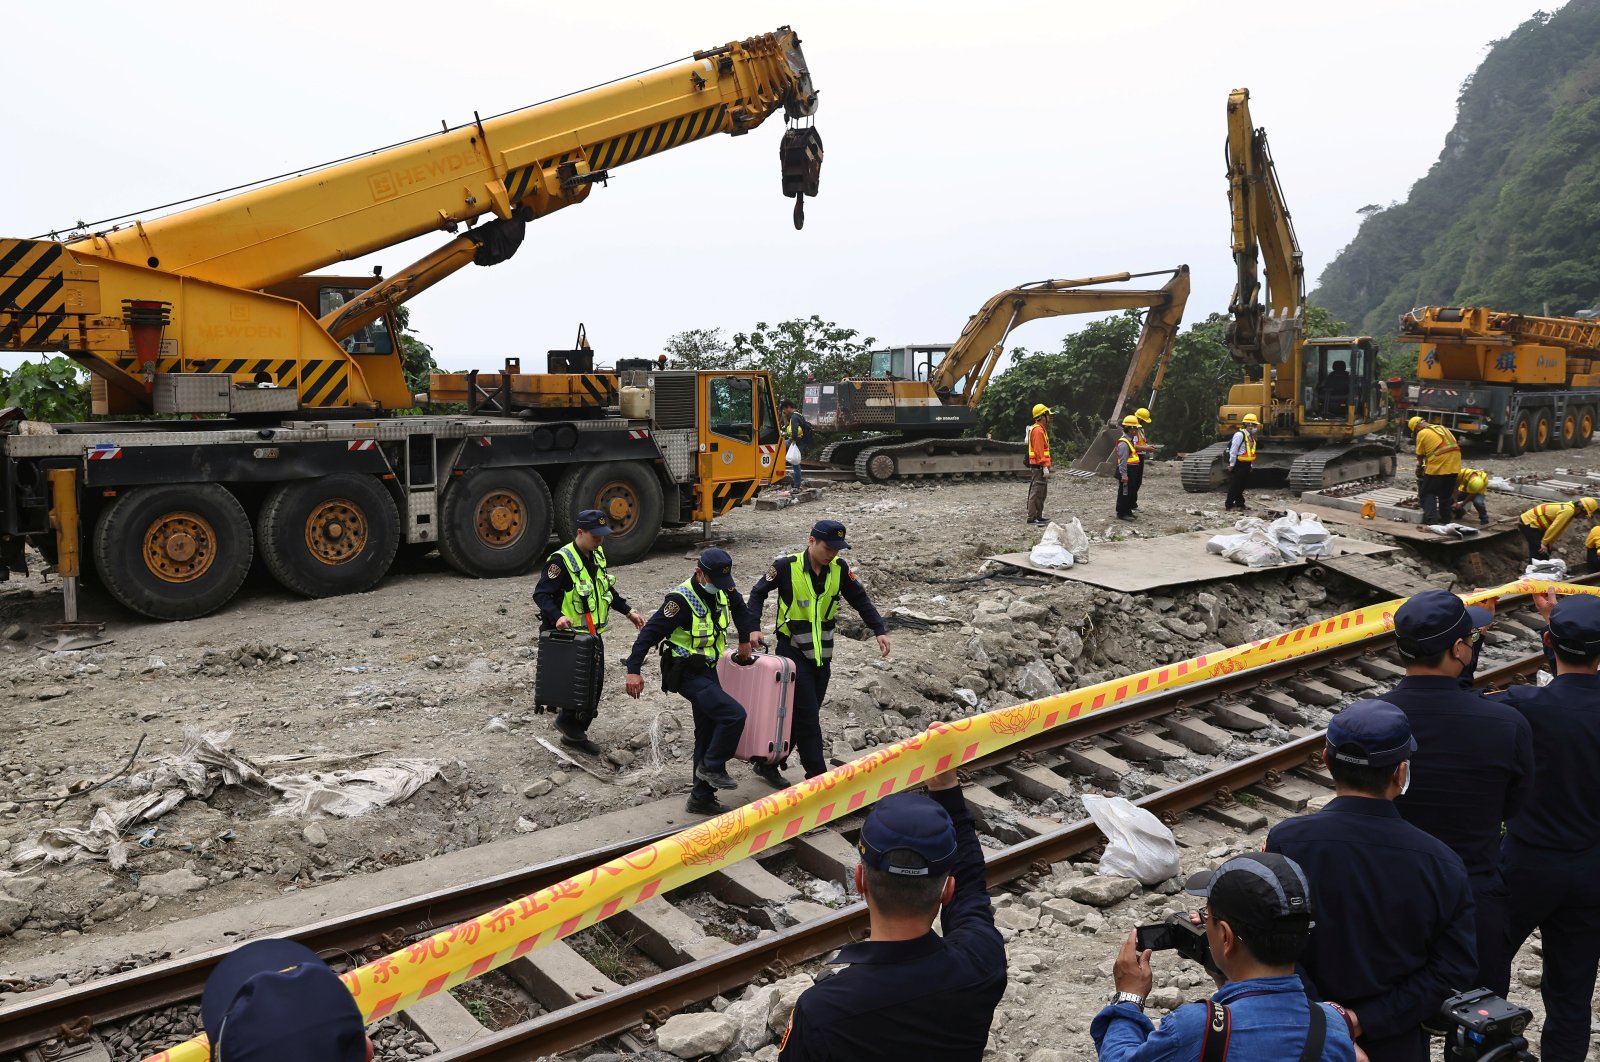 Police officers move passengers' belongings from the crash site a day after the deadly train derailment at a tunnel north of Hualien, Taiwan, April 3, 2021. (Reuters Photo)